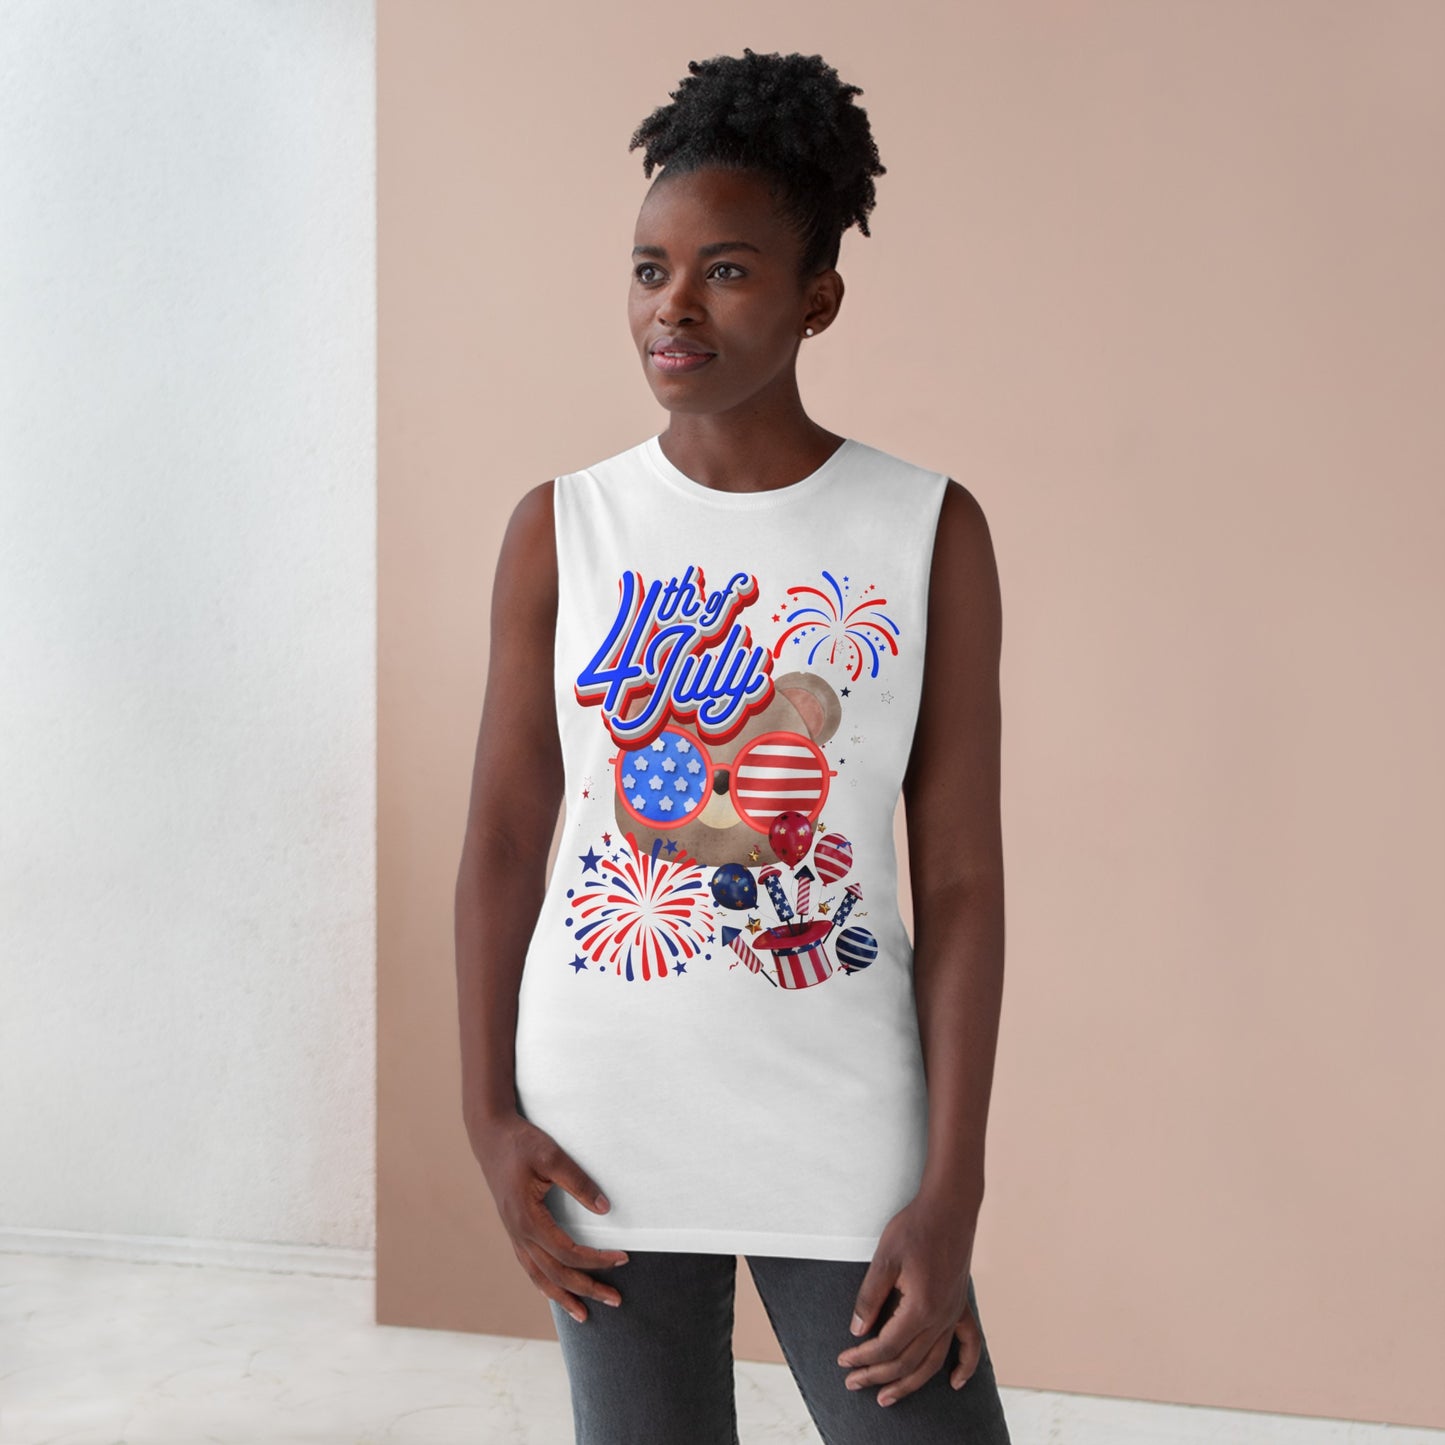 Unisex 4th of July Tank Top